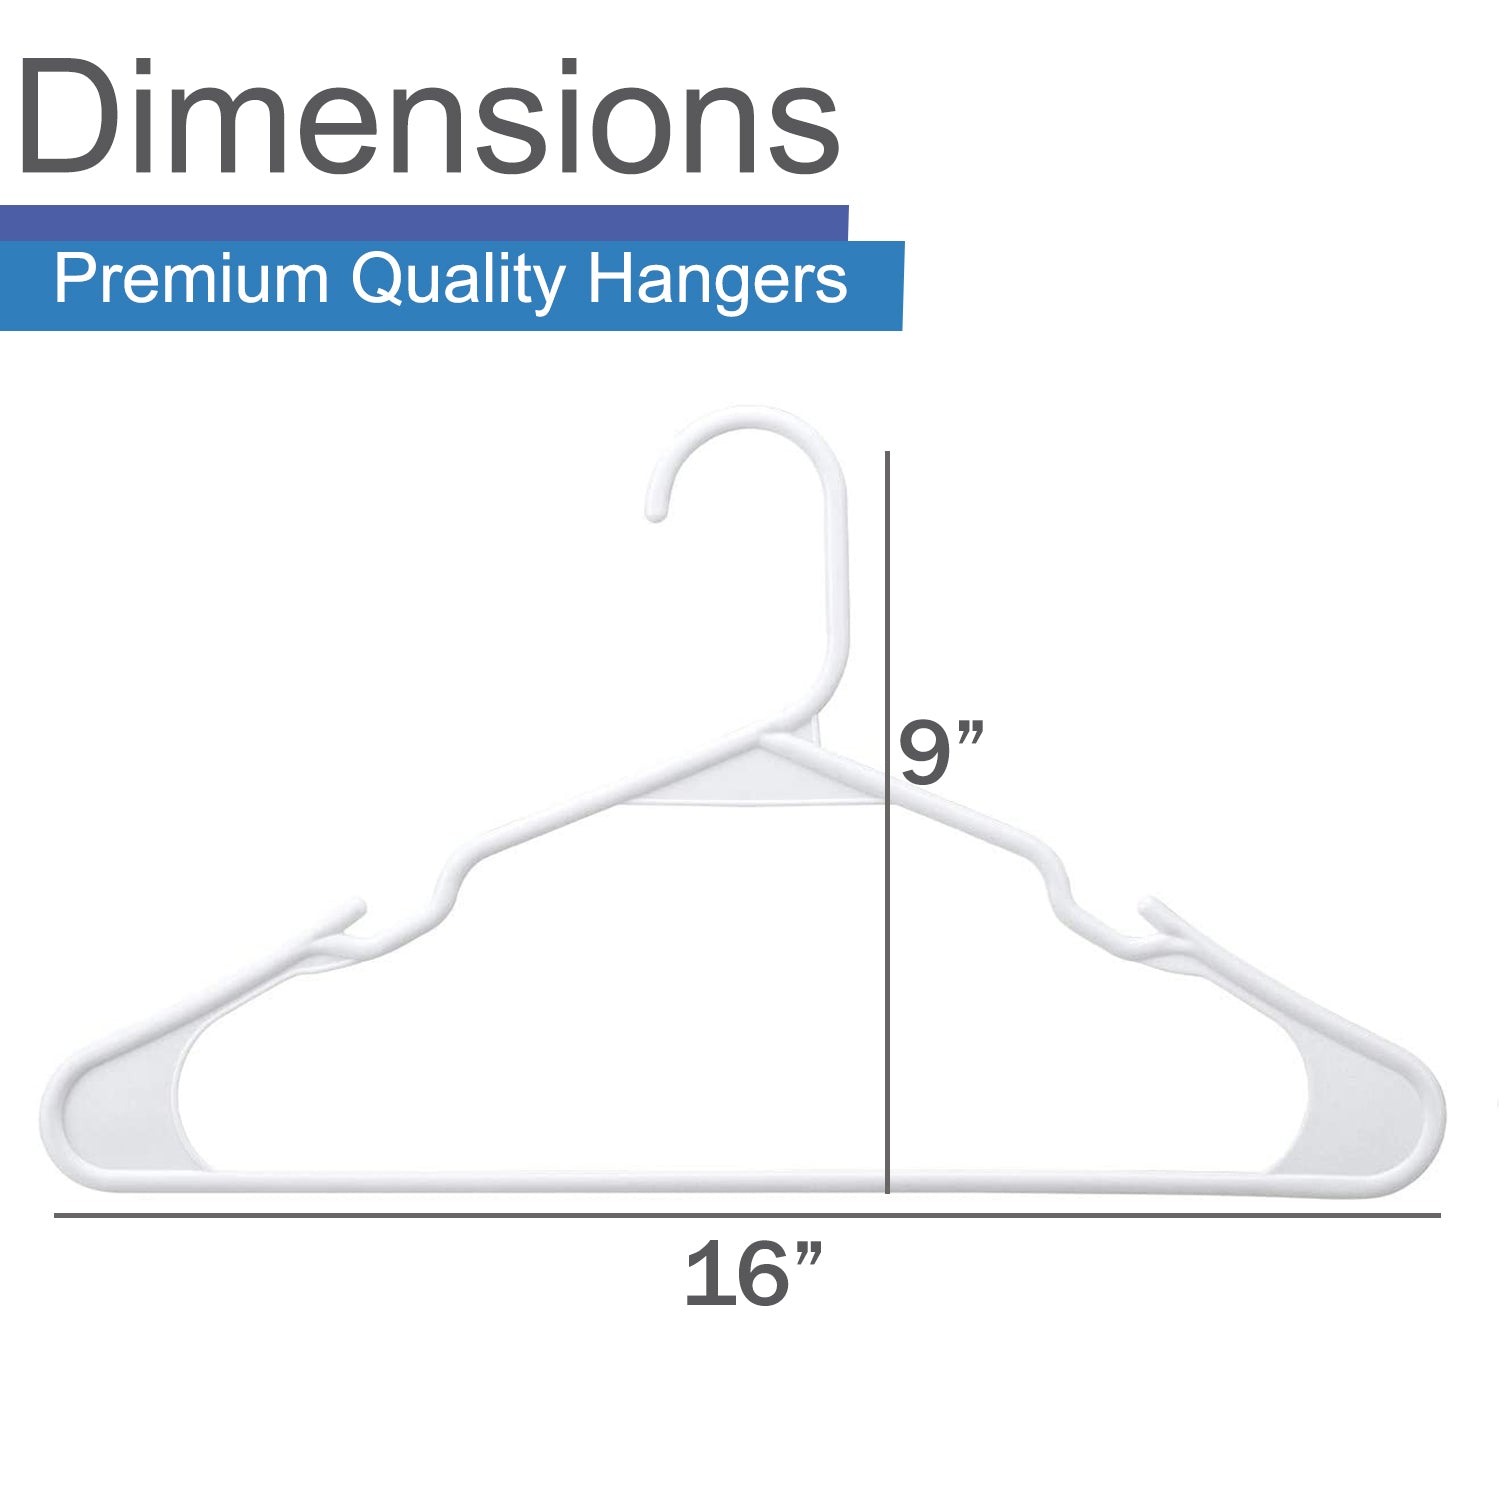 HG-044 17 Standard Weight Notched Dress and Coat Hanger - Pack of